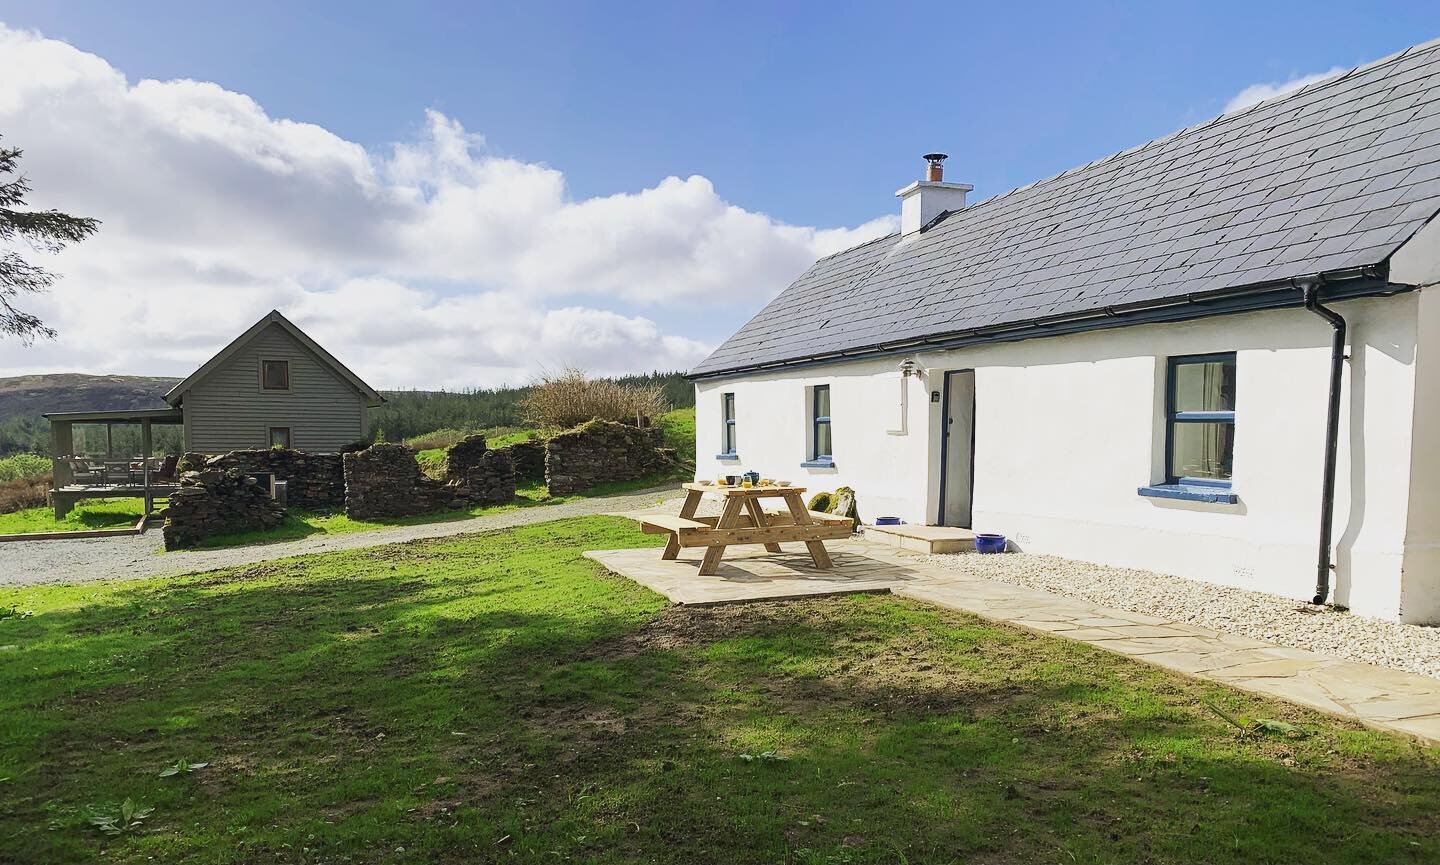 Breakfast outside at @thehiddencottage_donegal Glorious sunshine in Donegal.
Where else would you rather be?

#thehiddencottage_donegal @sawdaystravel #uniquehomestays #wildtravel #govisitdonegal